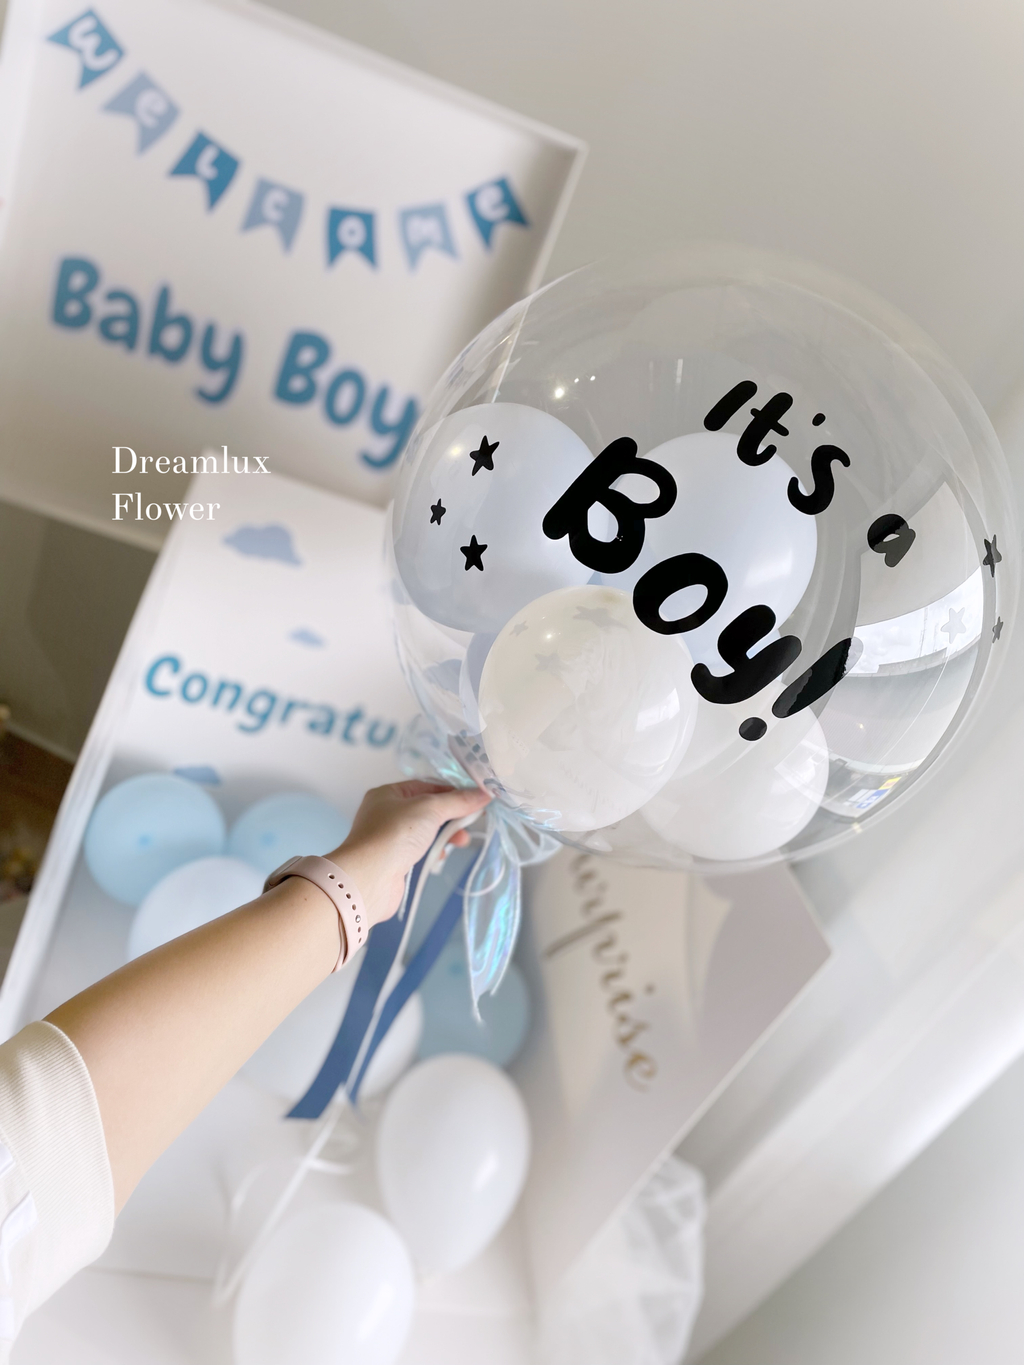 Gender Reveal Ballon filled with confetti/helium SALE | Reliable Rental FC